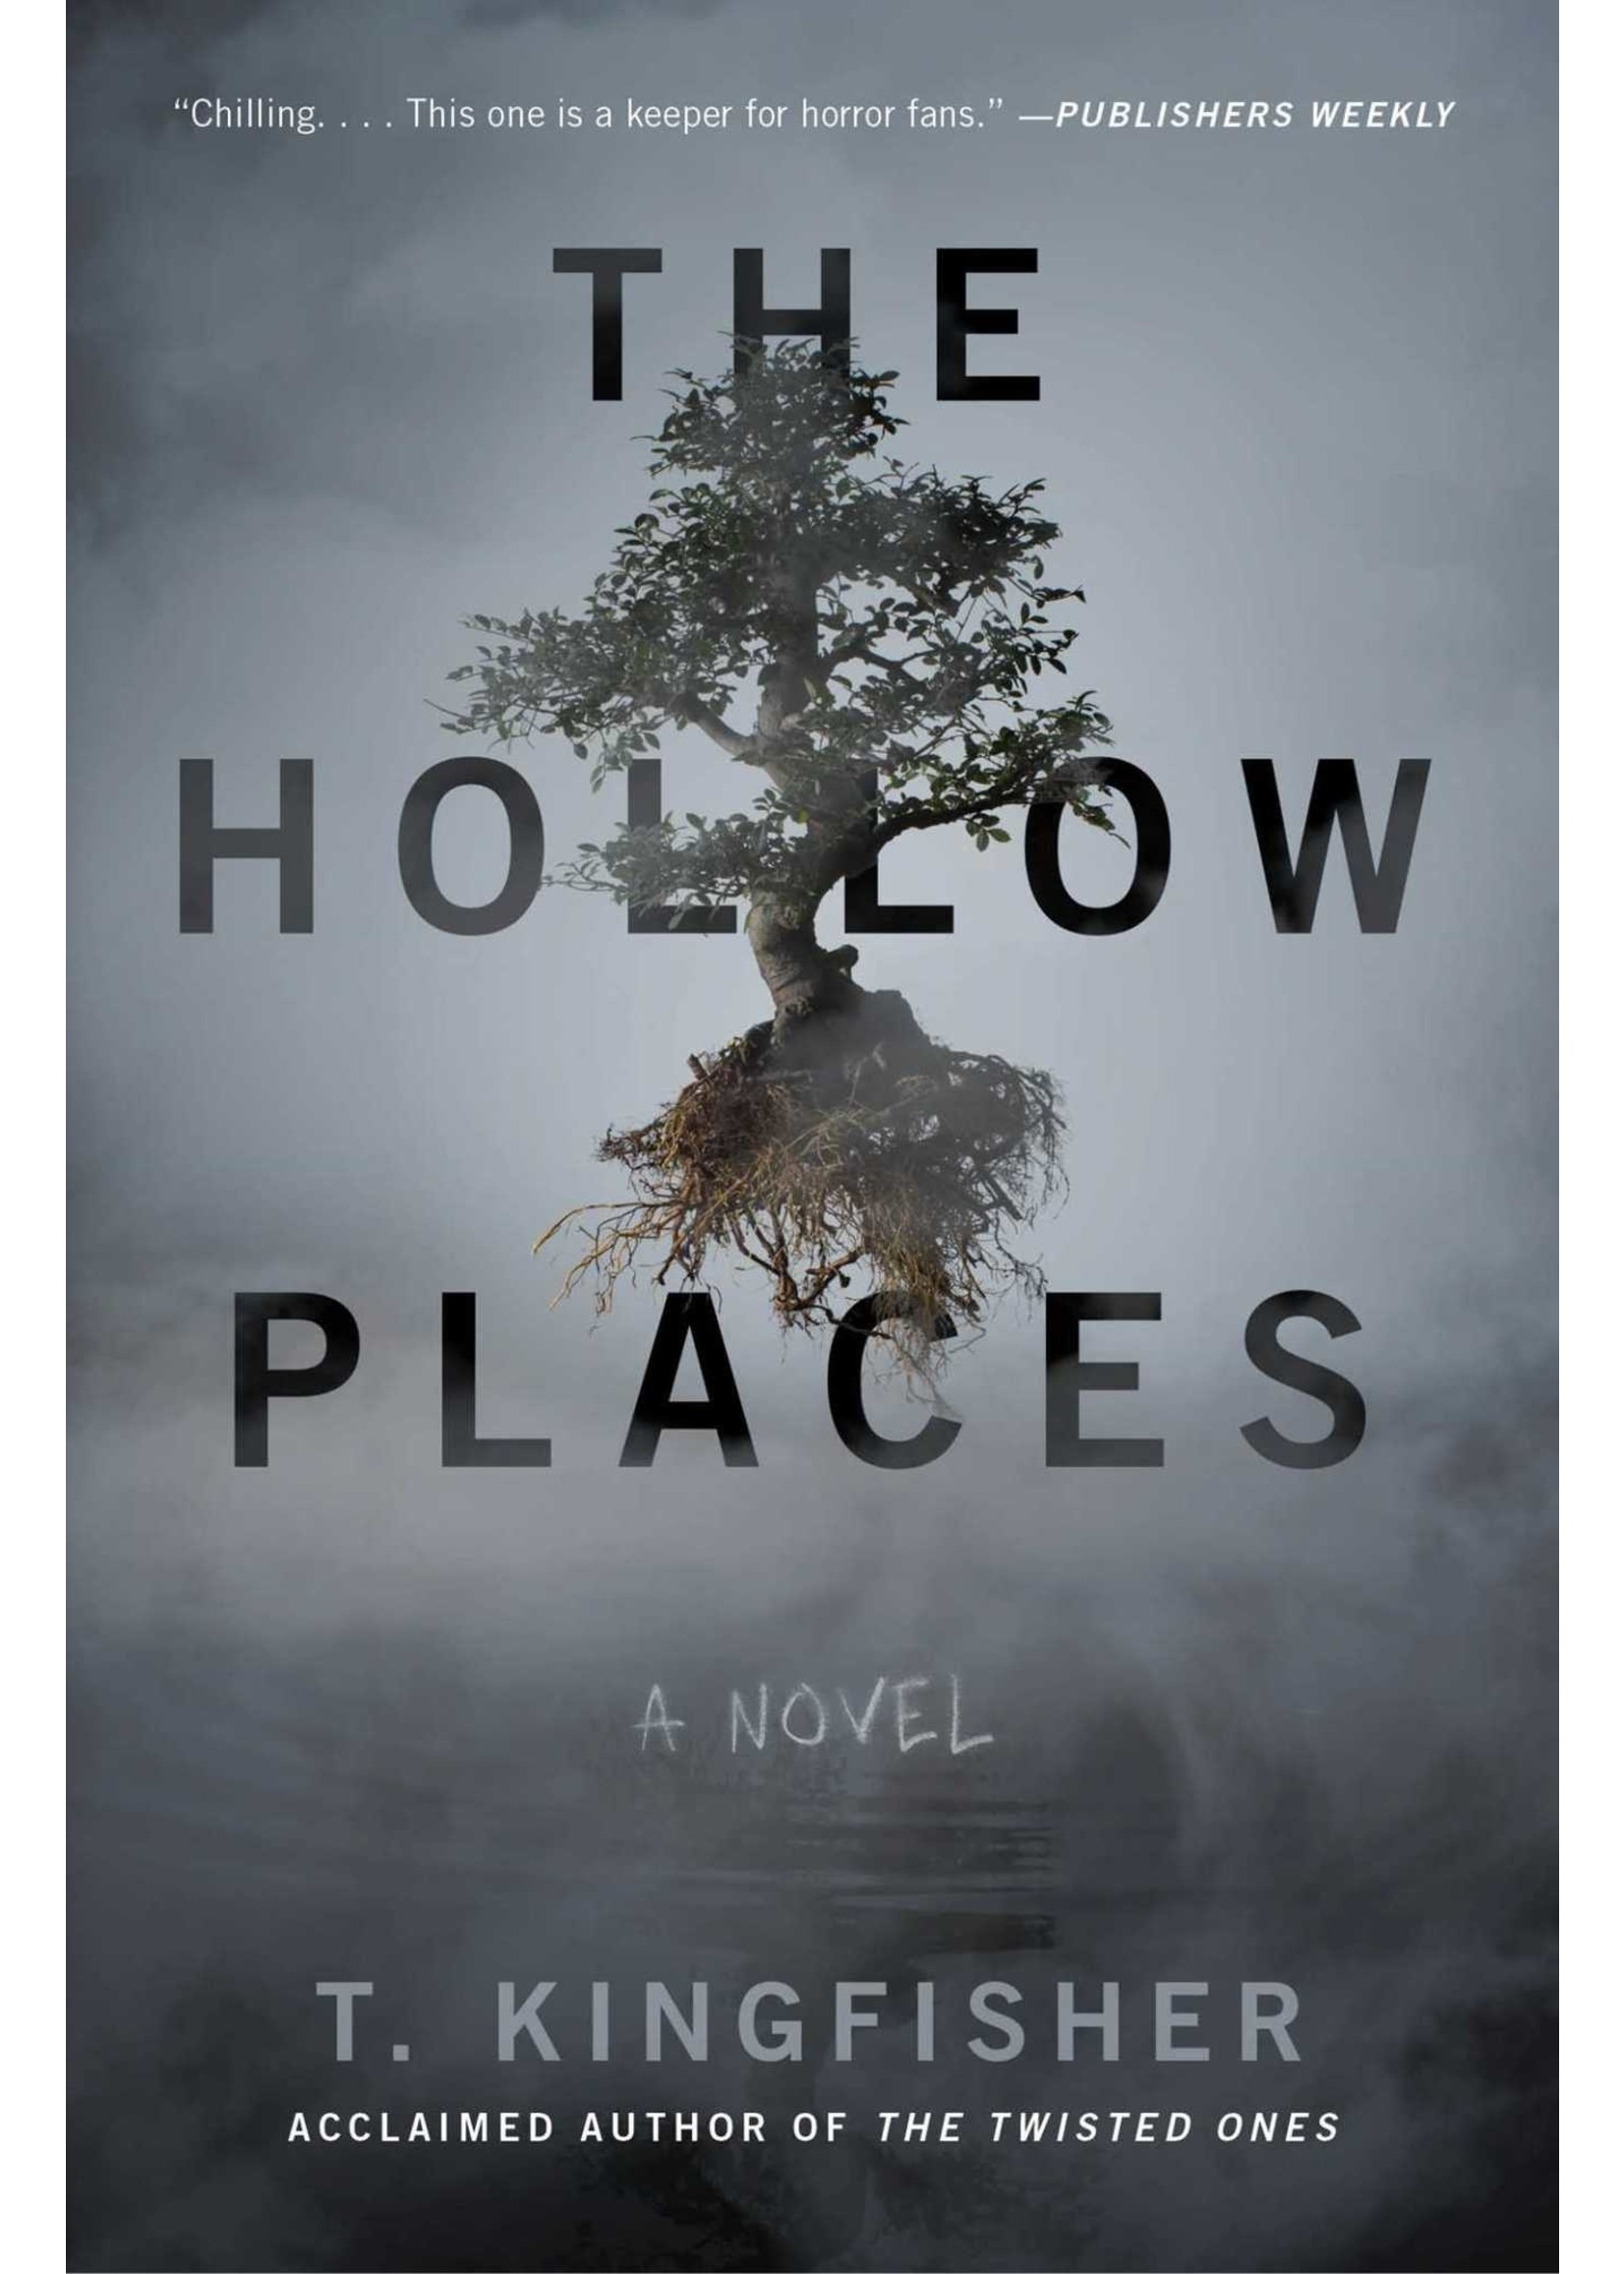 The Hollow Places by T. Kingfisher